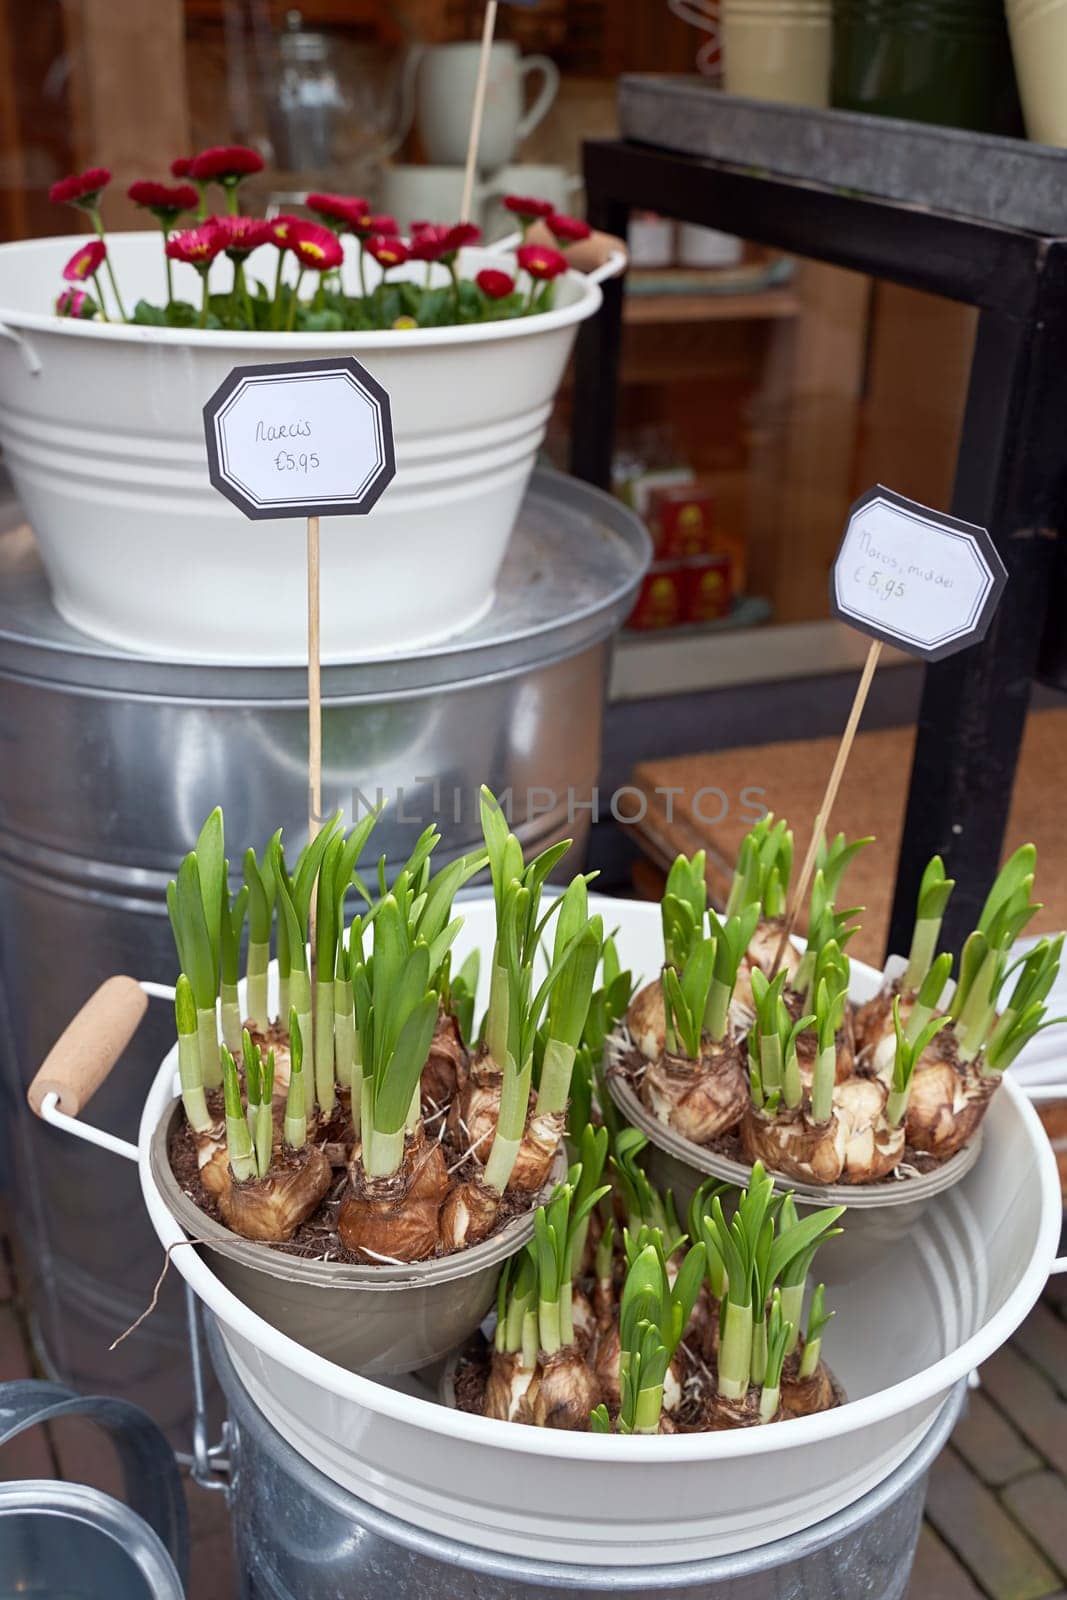 Narcissus shoots or seedlings for sale